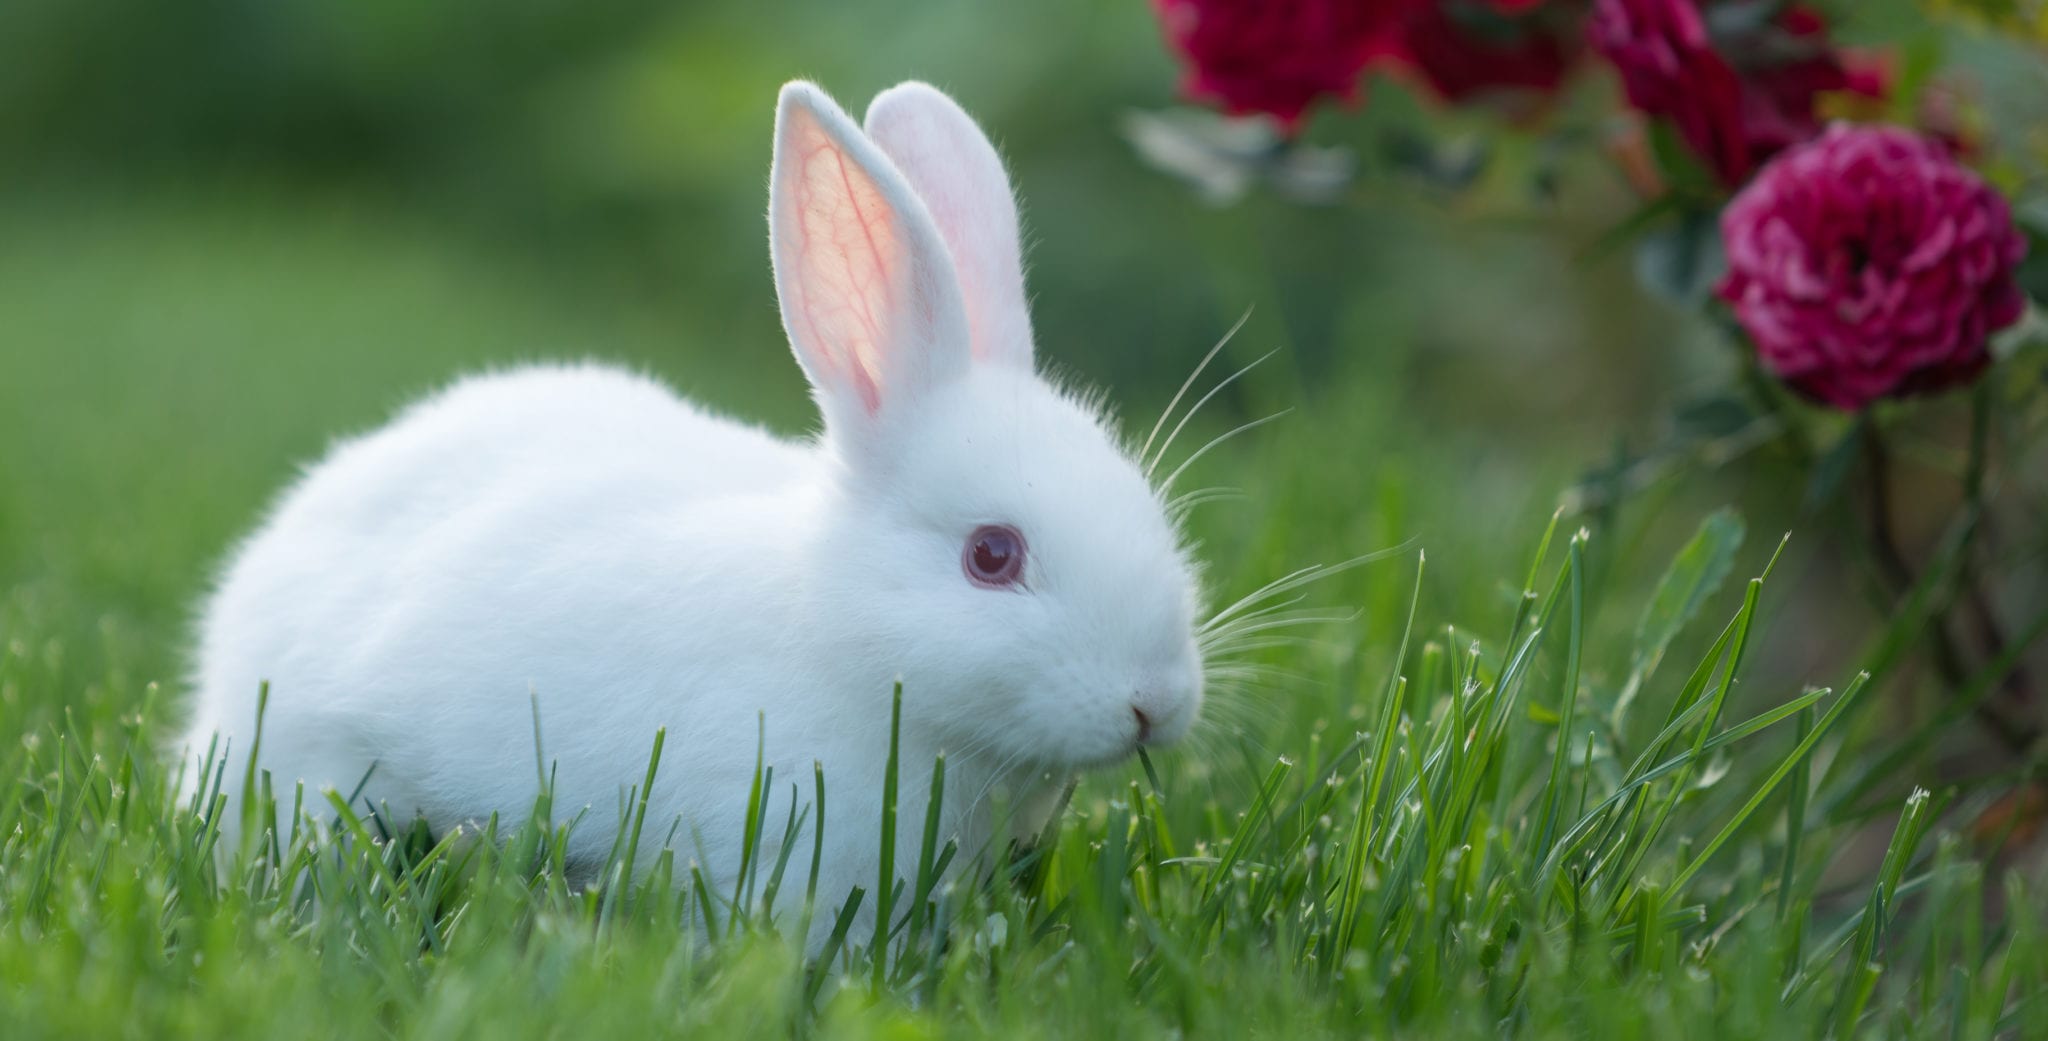 White bunny in grass by pink rose